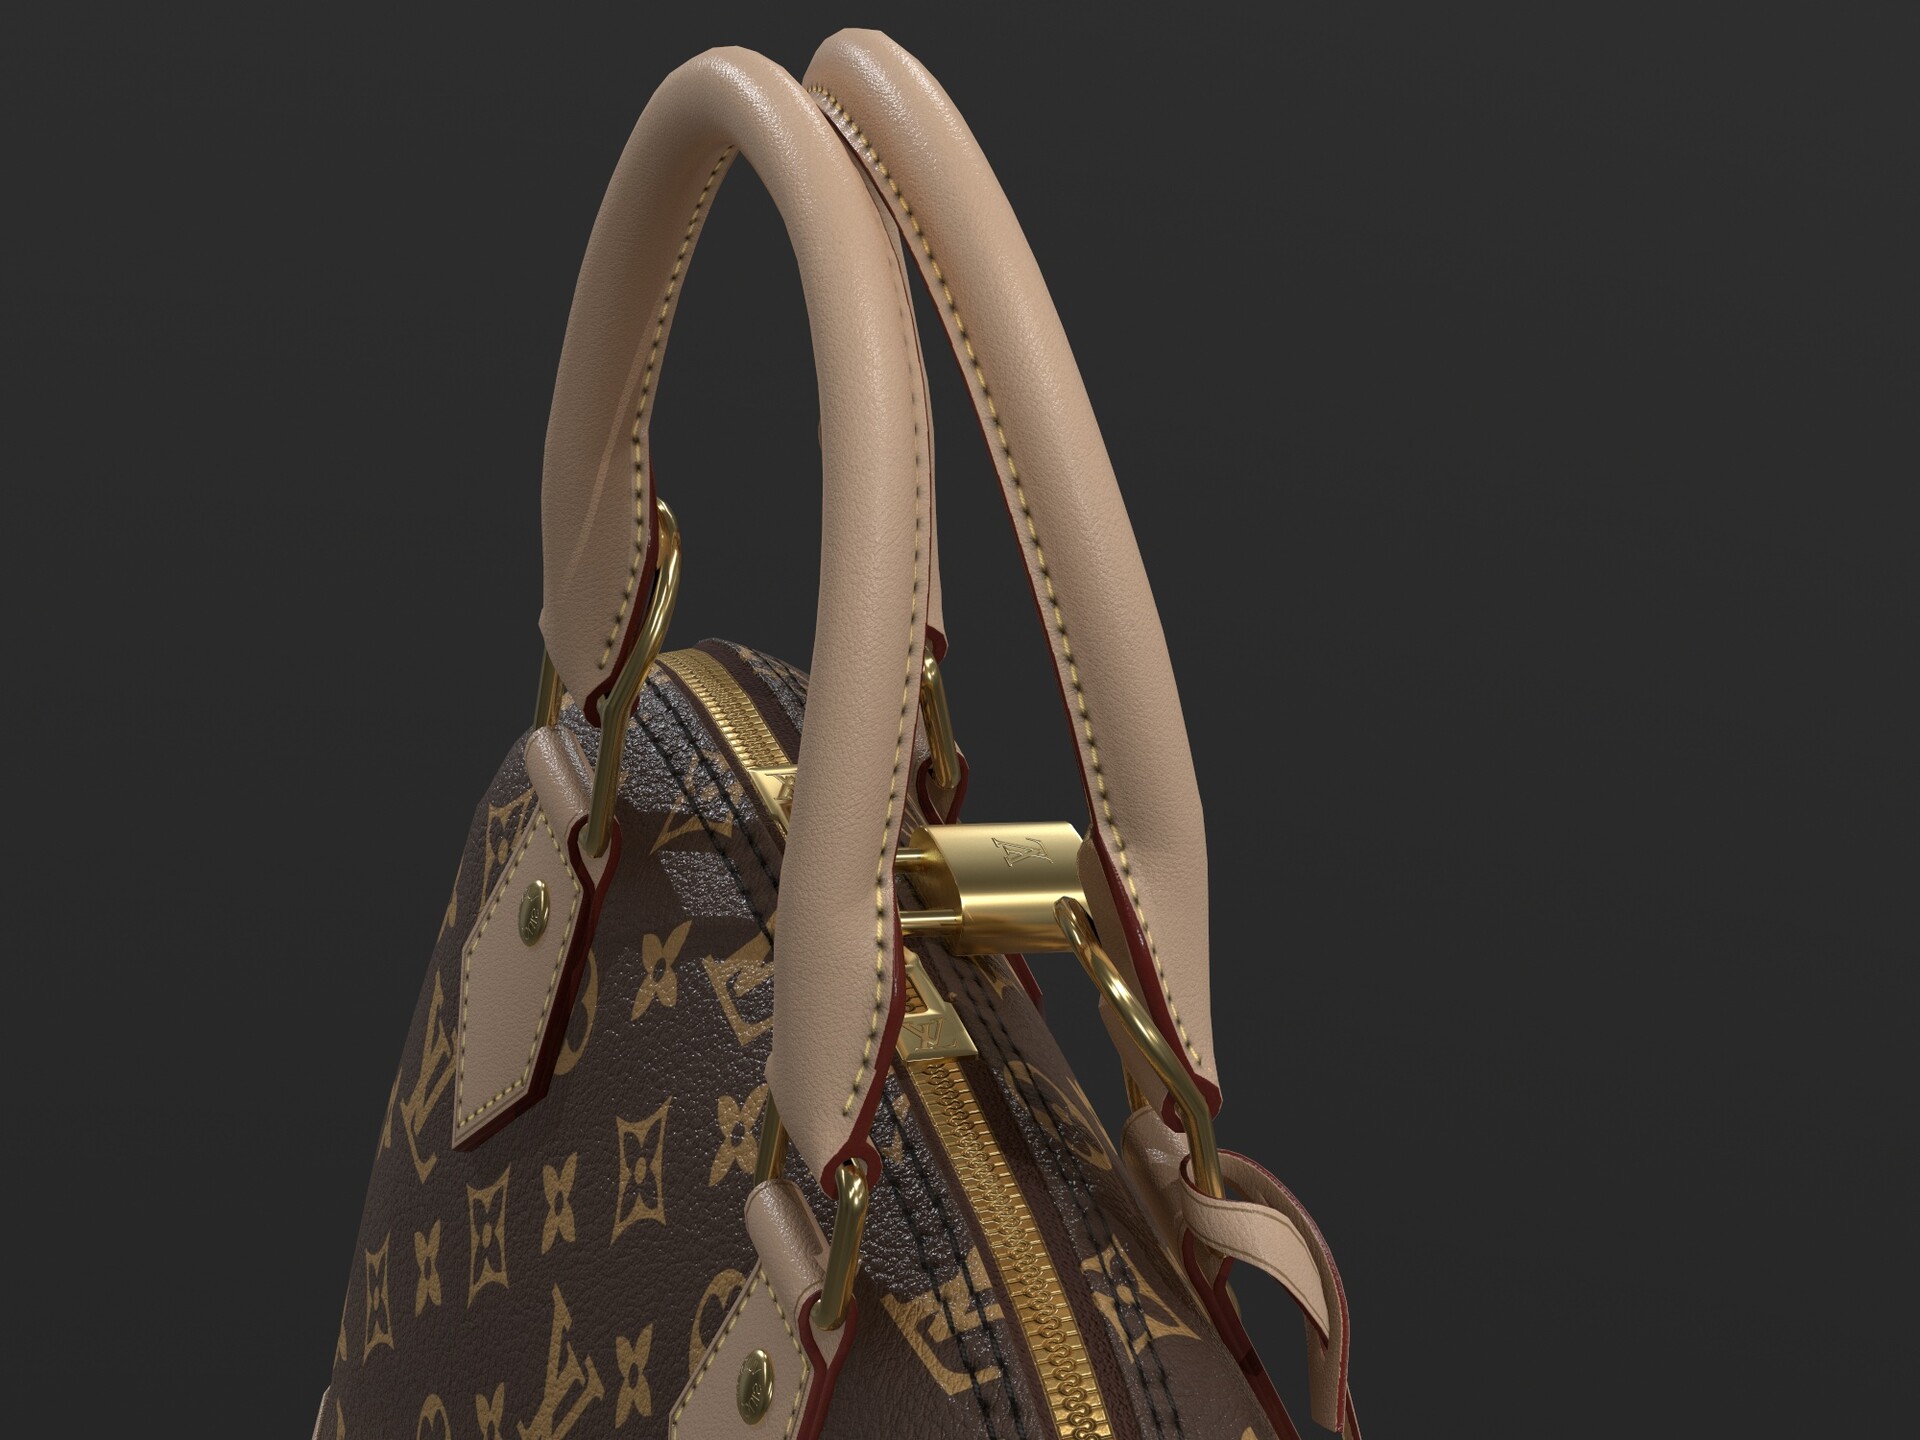 3D model Louis Vuitton Alma BB Top Handle Bag in Epi Leather Warm VR / AR /  low-poly